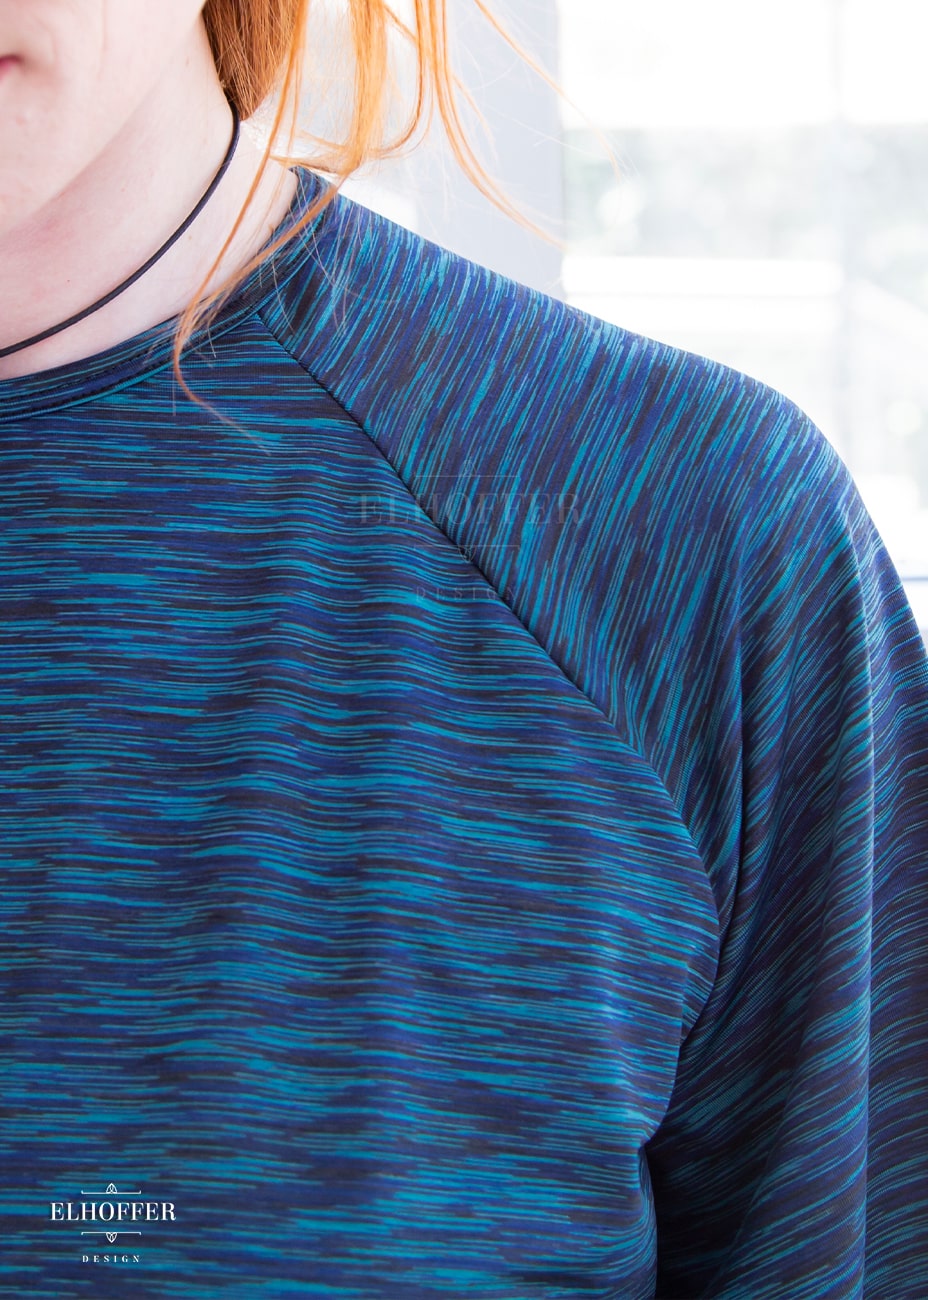 Detail shot of the pattern of the blue fabric.